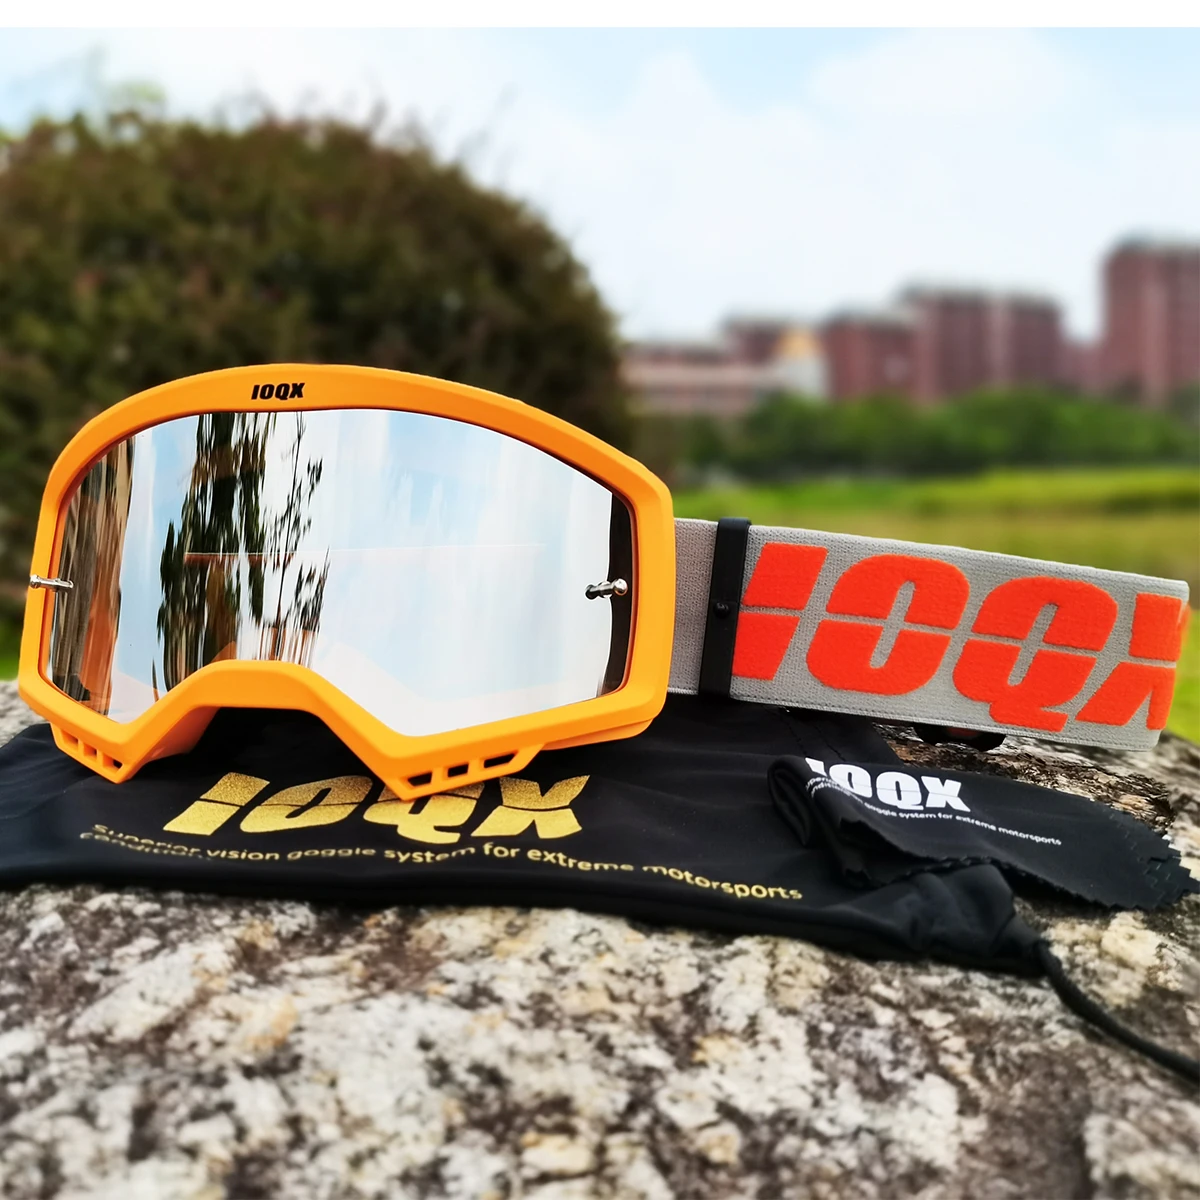 Motocross Cross Country Cycling Glasse Motorcycle Goggles Motorcycle Sunglasses Glasses 2021 Dirt Bike Goggles Glasses Cycling